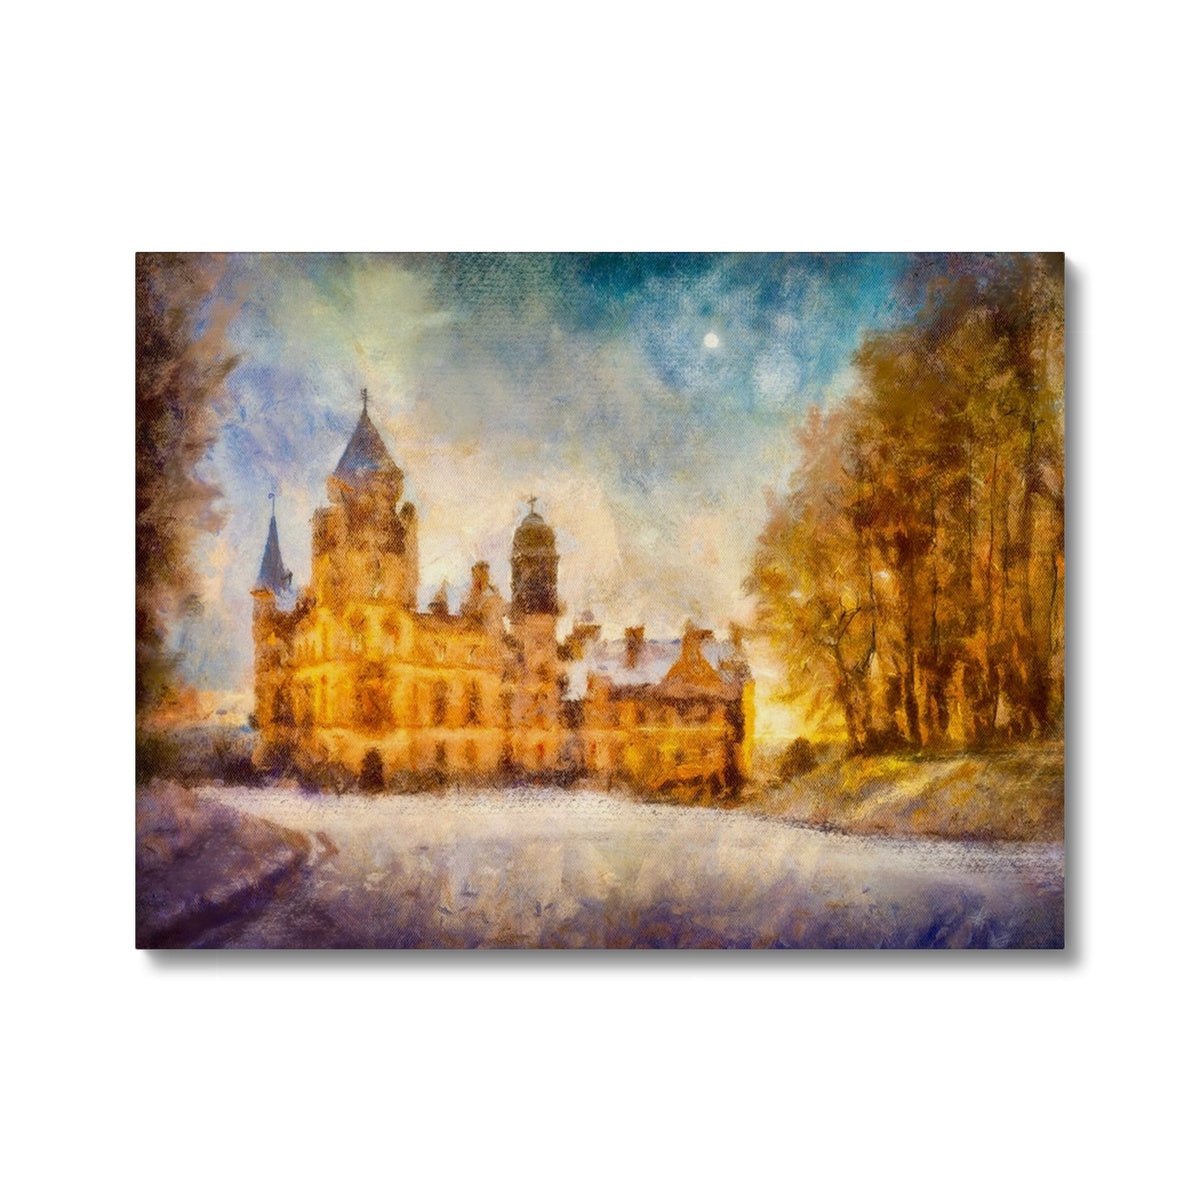 Dunrobin Castle Moonlight Painting | Canvas From Scotland-Contemporary Stretched Canvas Prints-Historic & Iconic Scotland Art Gallery-24"x18"-Paintings, Prints, Homeware, Art Gifts From Scotland By Scottish Artist Kevin Hunter